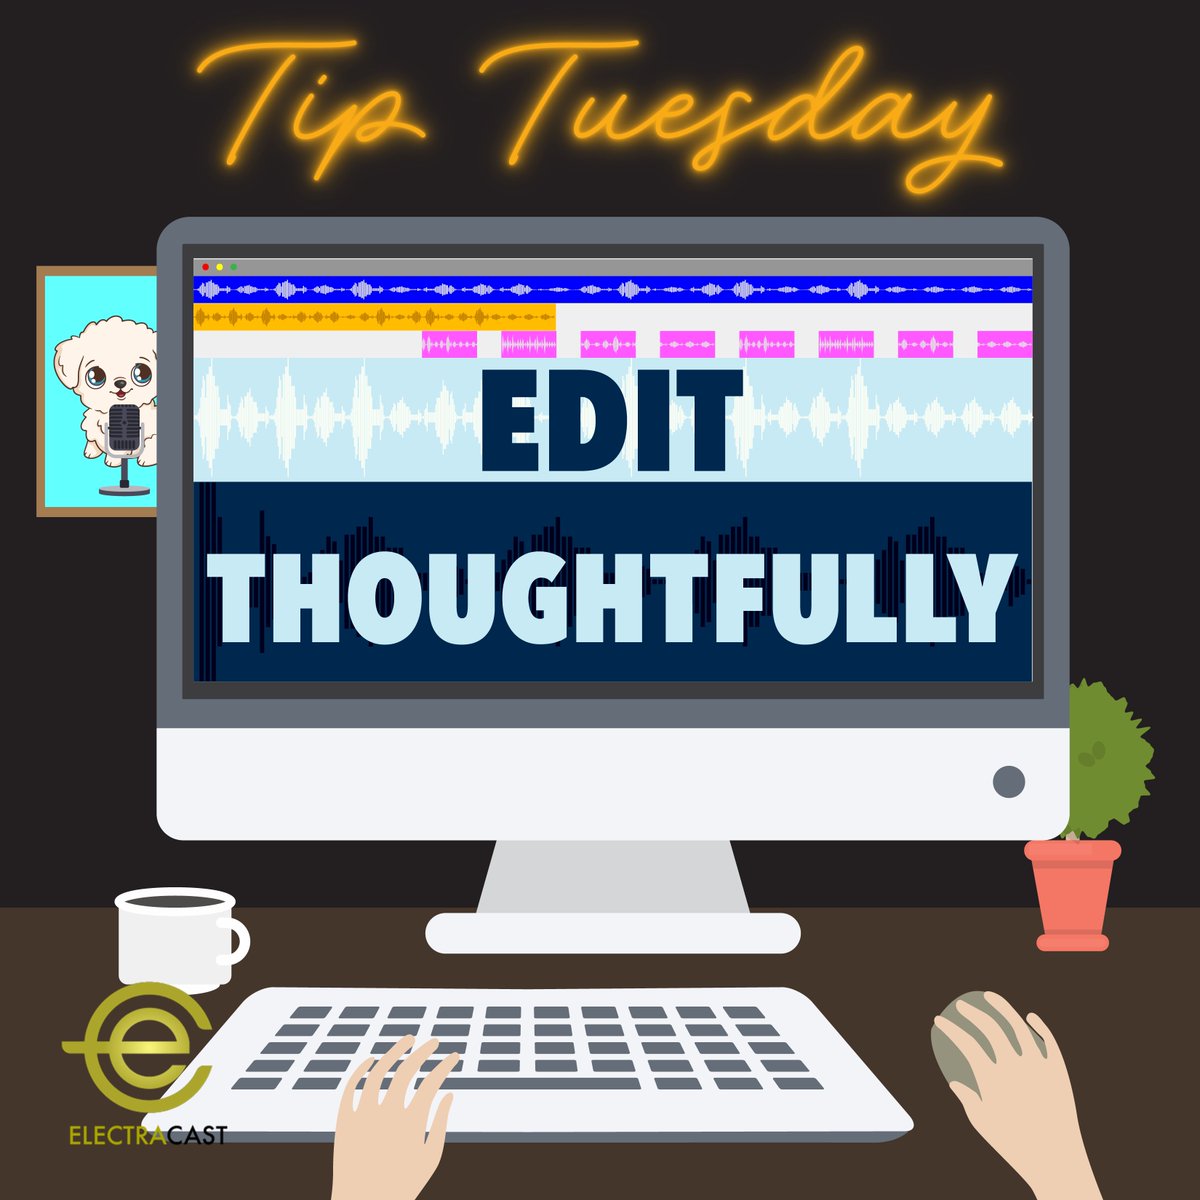 ✨ Elevate Your Podcast Editing Game! ✨ Remember, post-production magic starts with thoughtful edits. Trim the clutter, enhance clarity, and sprinkle in the perfect soundscapes for an unforgettable listening experience! 🎙️✂️🎶 #PodcastEditing #TipTuesday #EditThoughtfully